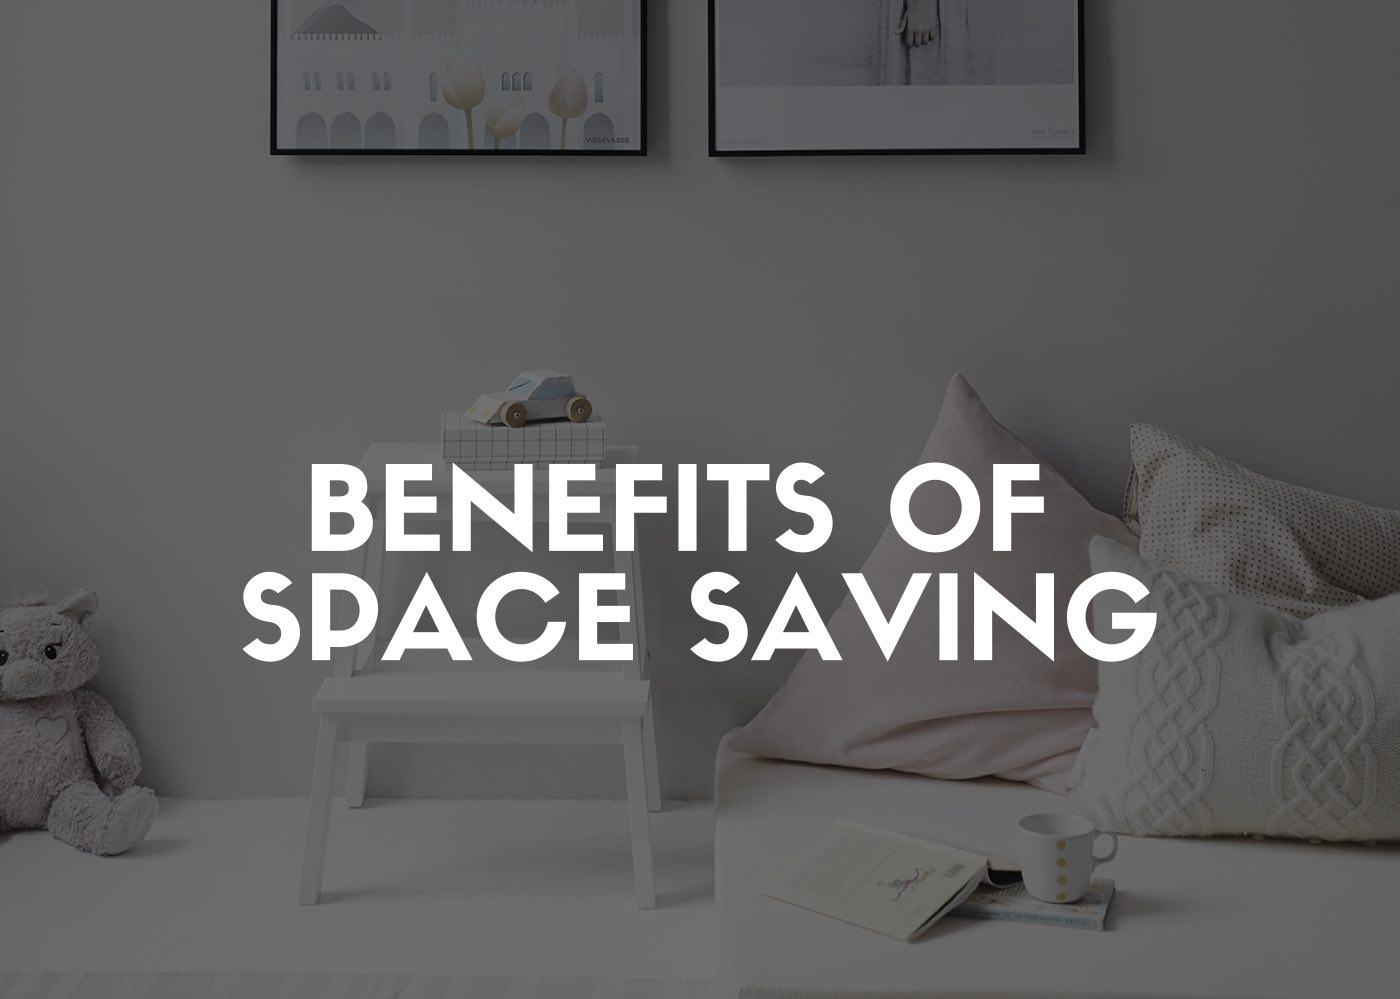 https://spacesave.co/wp-content/uploads/2019/12/benefits-of-space-saving.jpg